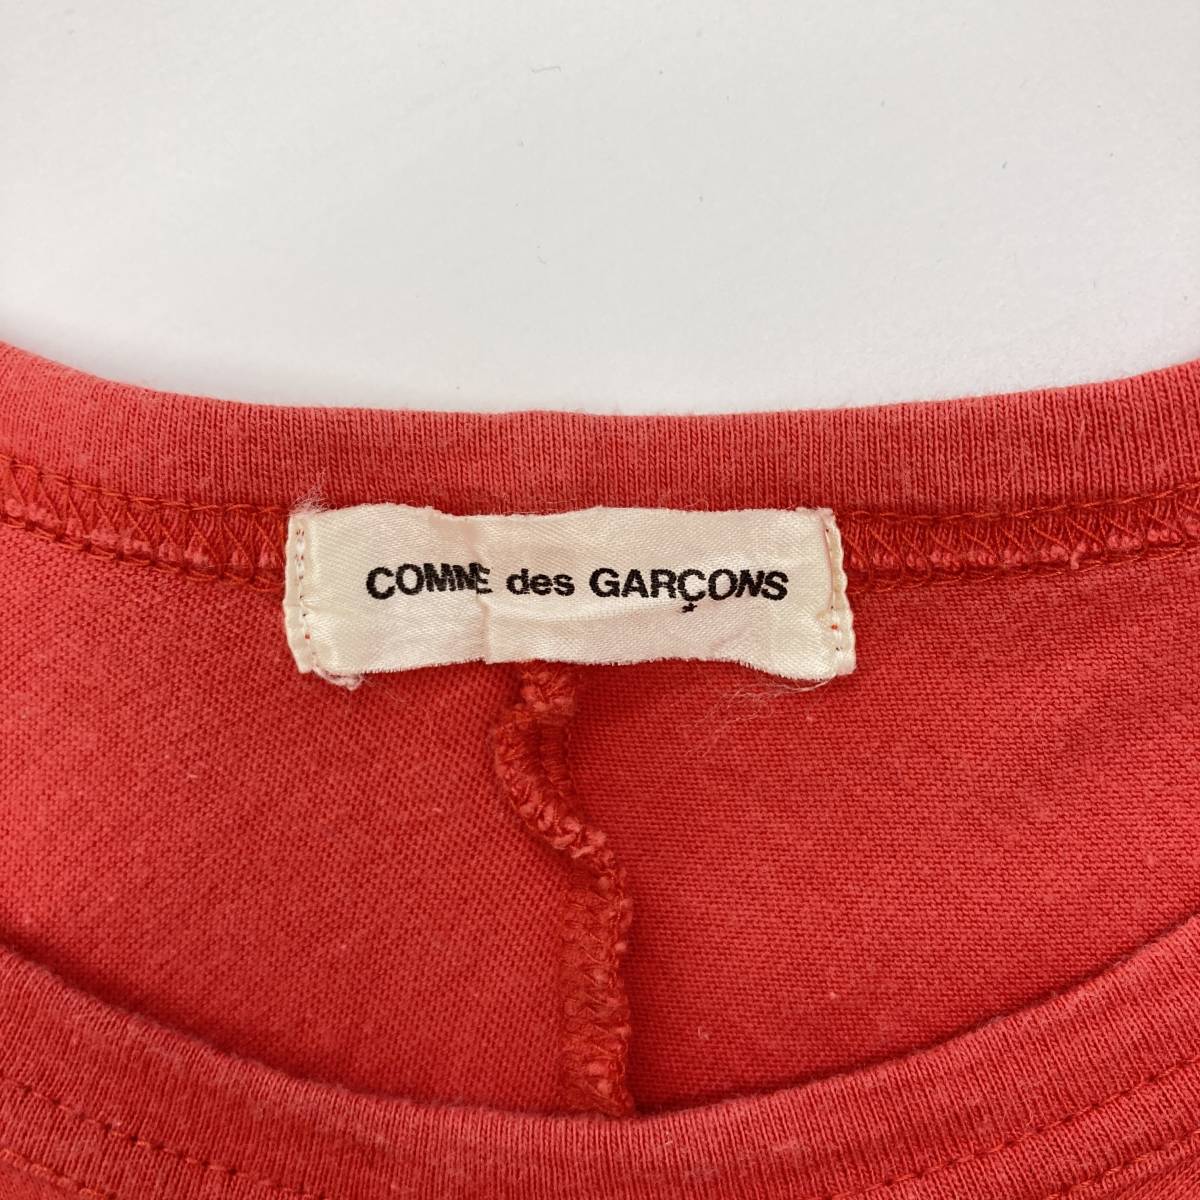 80s 90s COMME des GARCONS 変形 半袖 カットソー レッド 赤 コムデギャルソン Tシャツ Tee VINTAGE archive 2090598_画像4